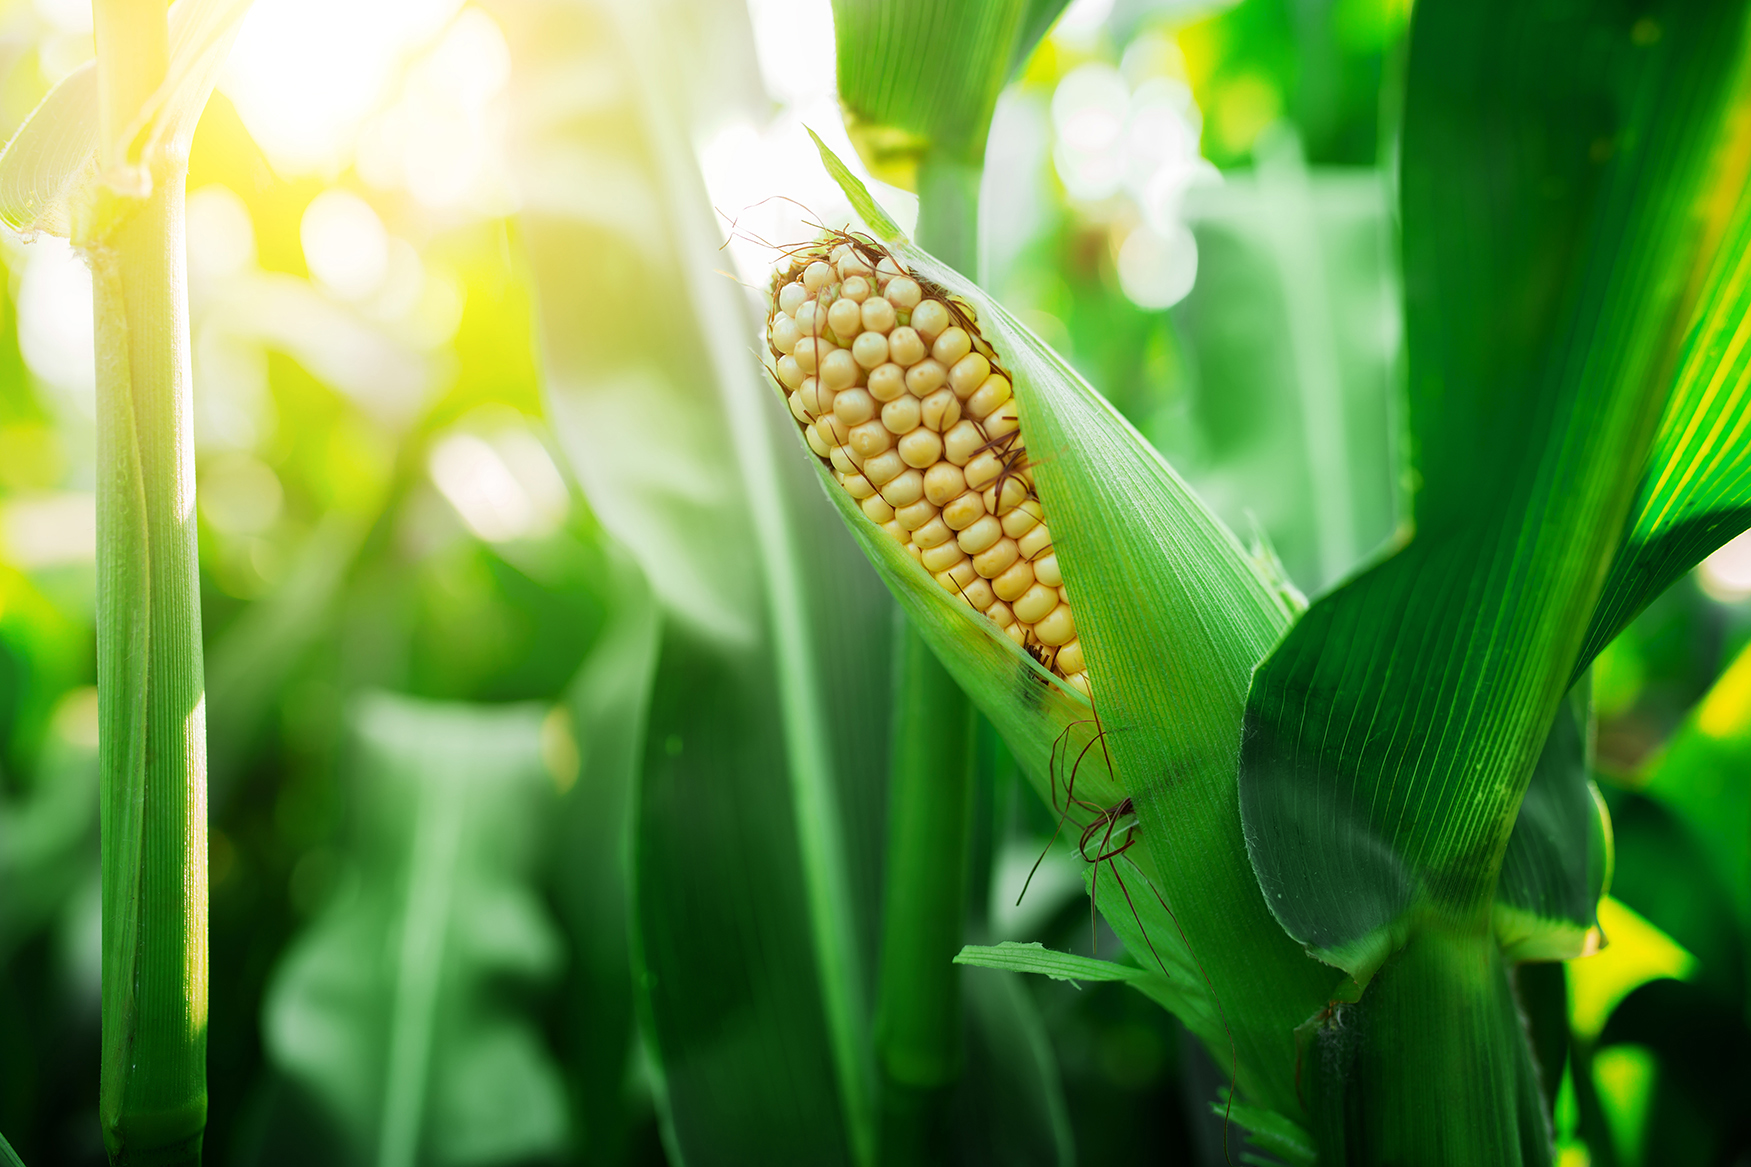 Crops like corn are vitally important to farmers and the communities that depend on them.